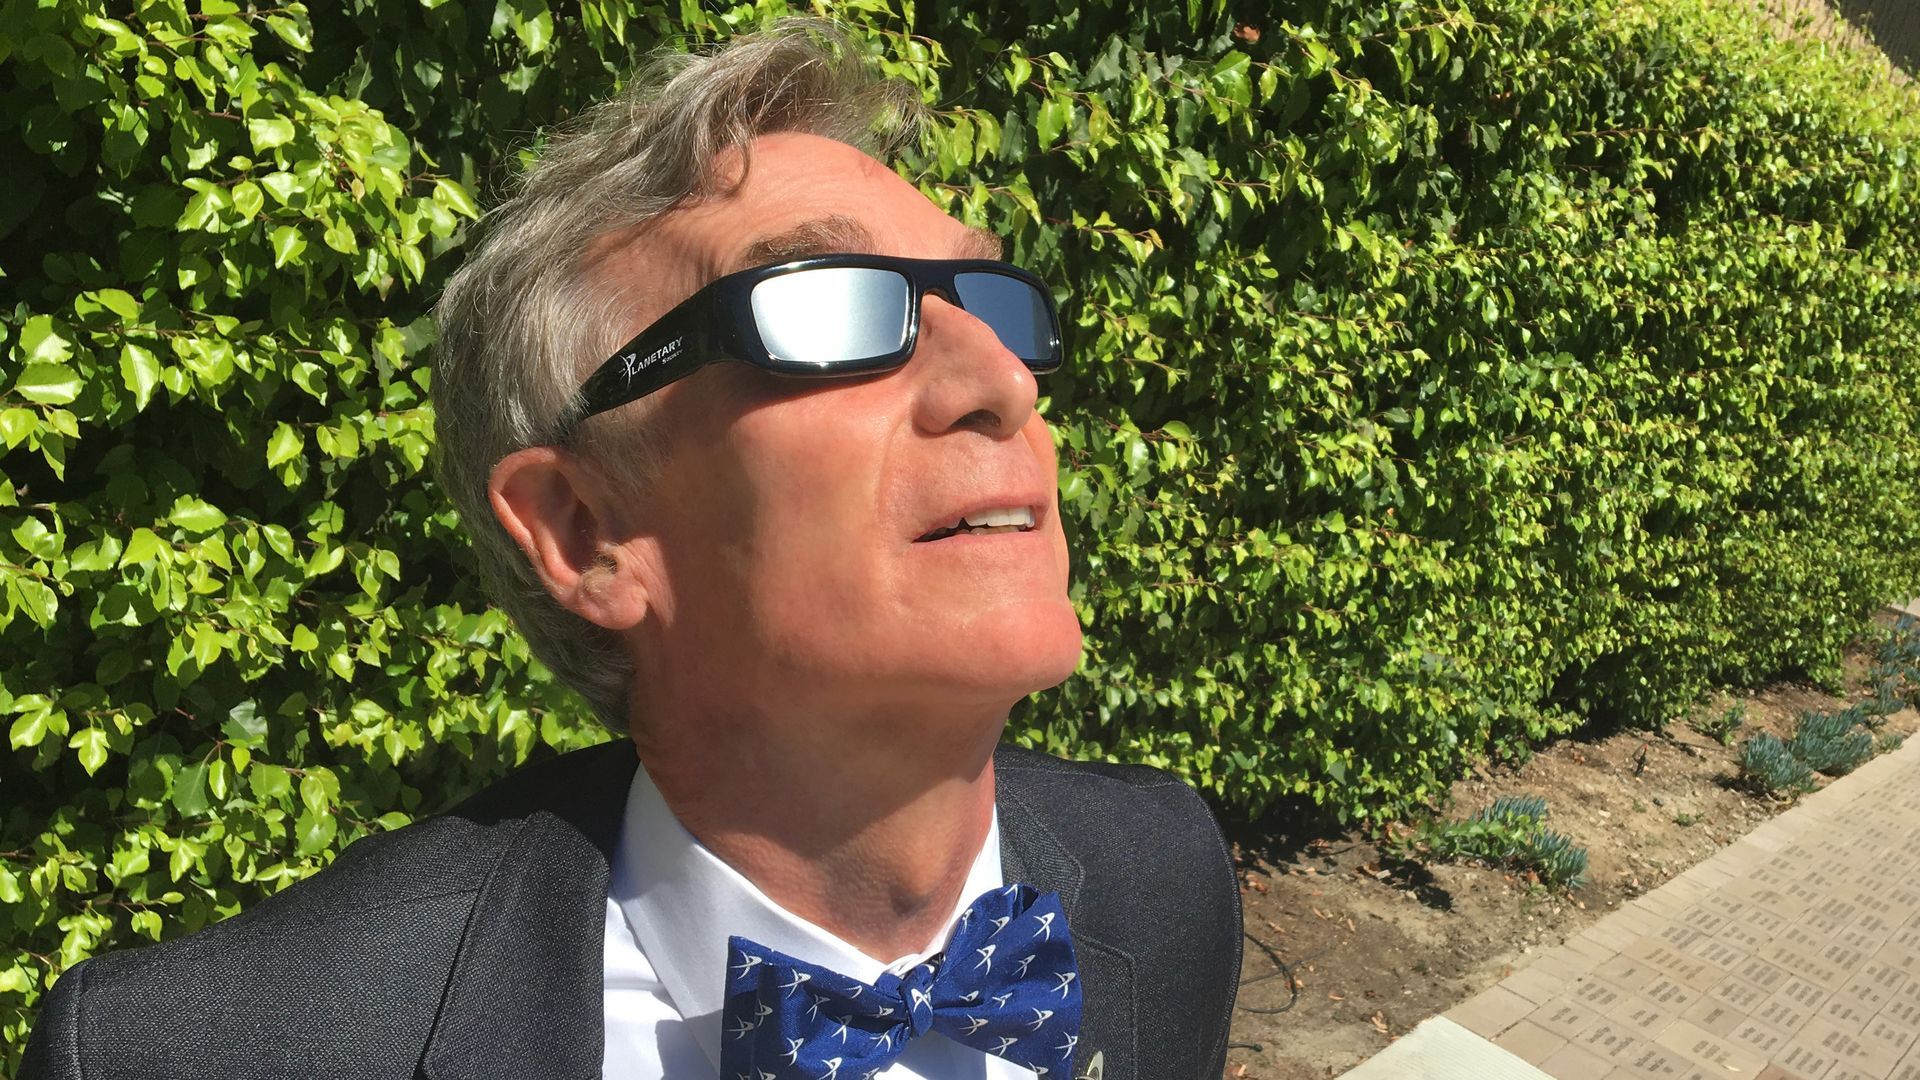 A photo of Bill Nye the science guy in eclipse glasses